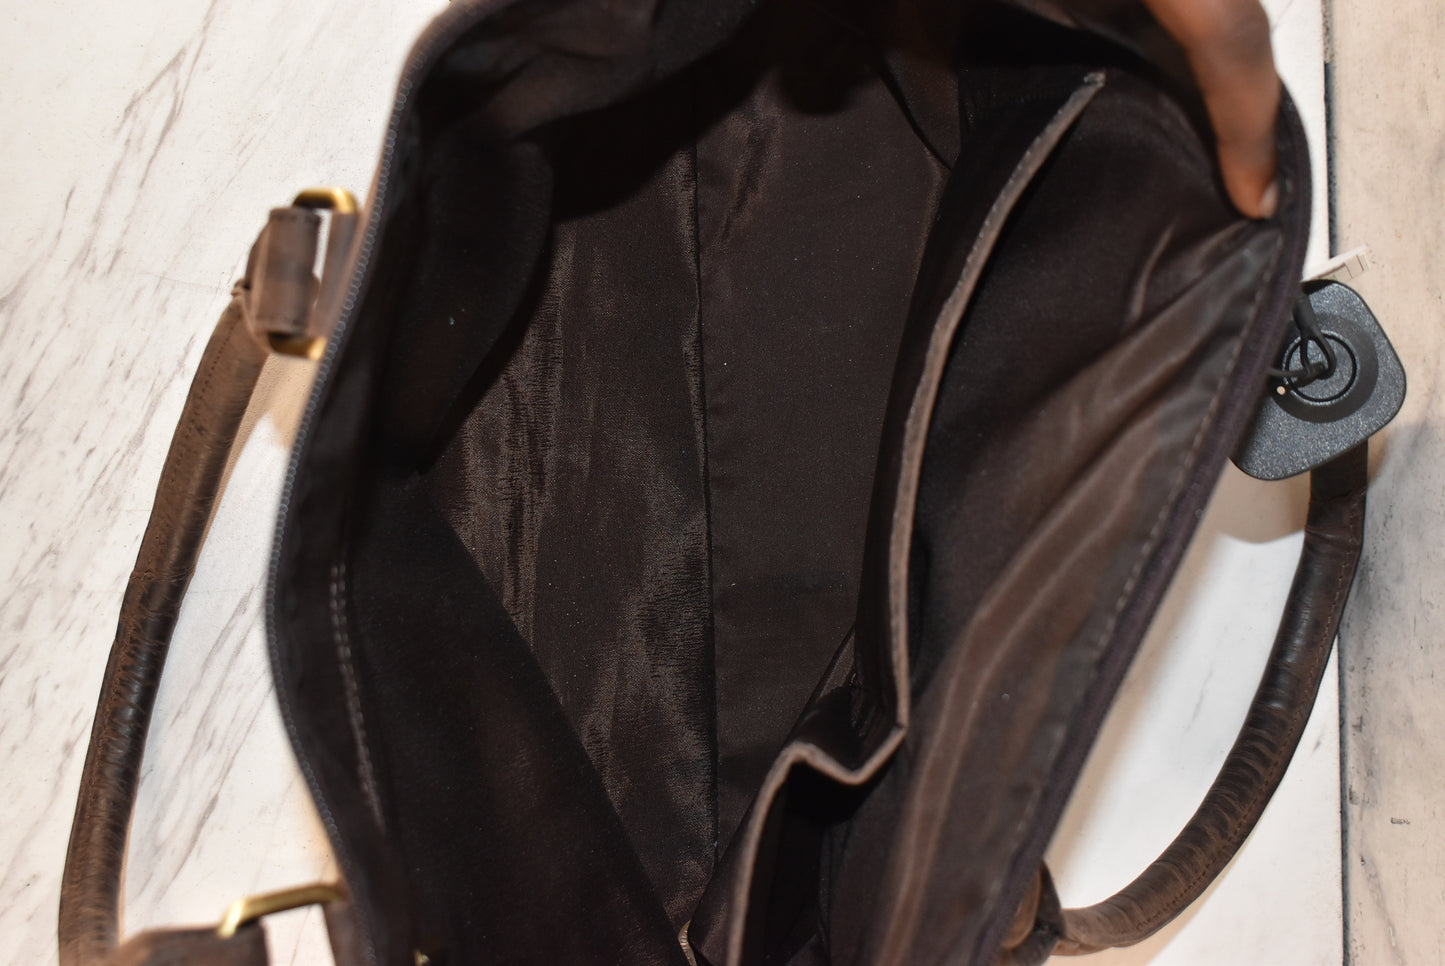 Handbag Leather By Clothes Mentor  Size: Large